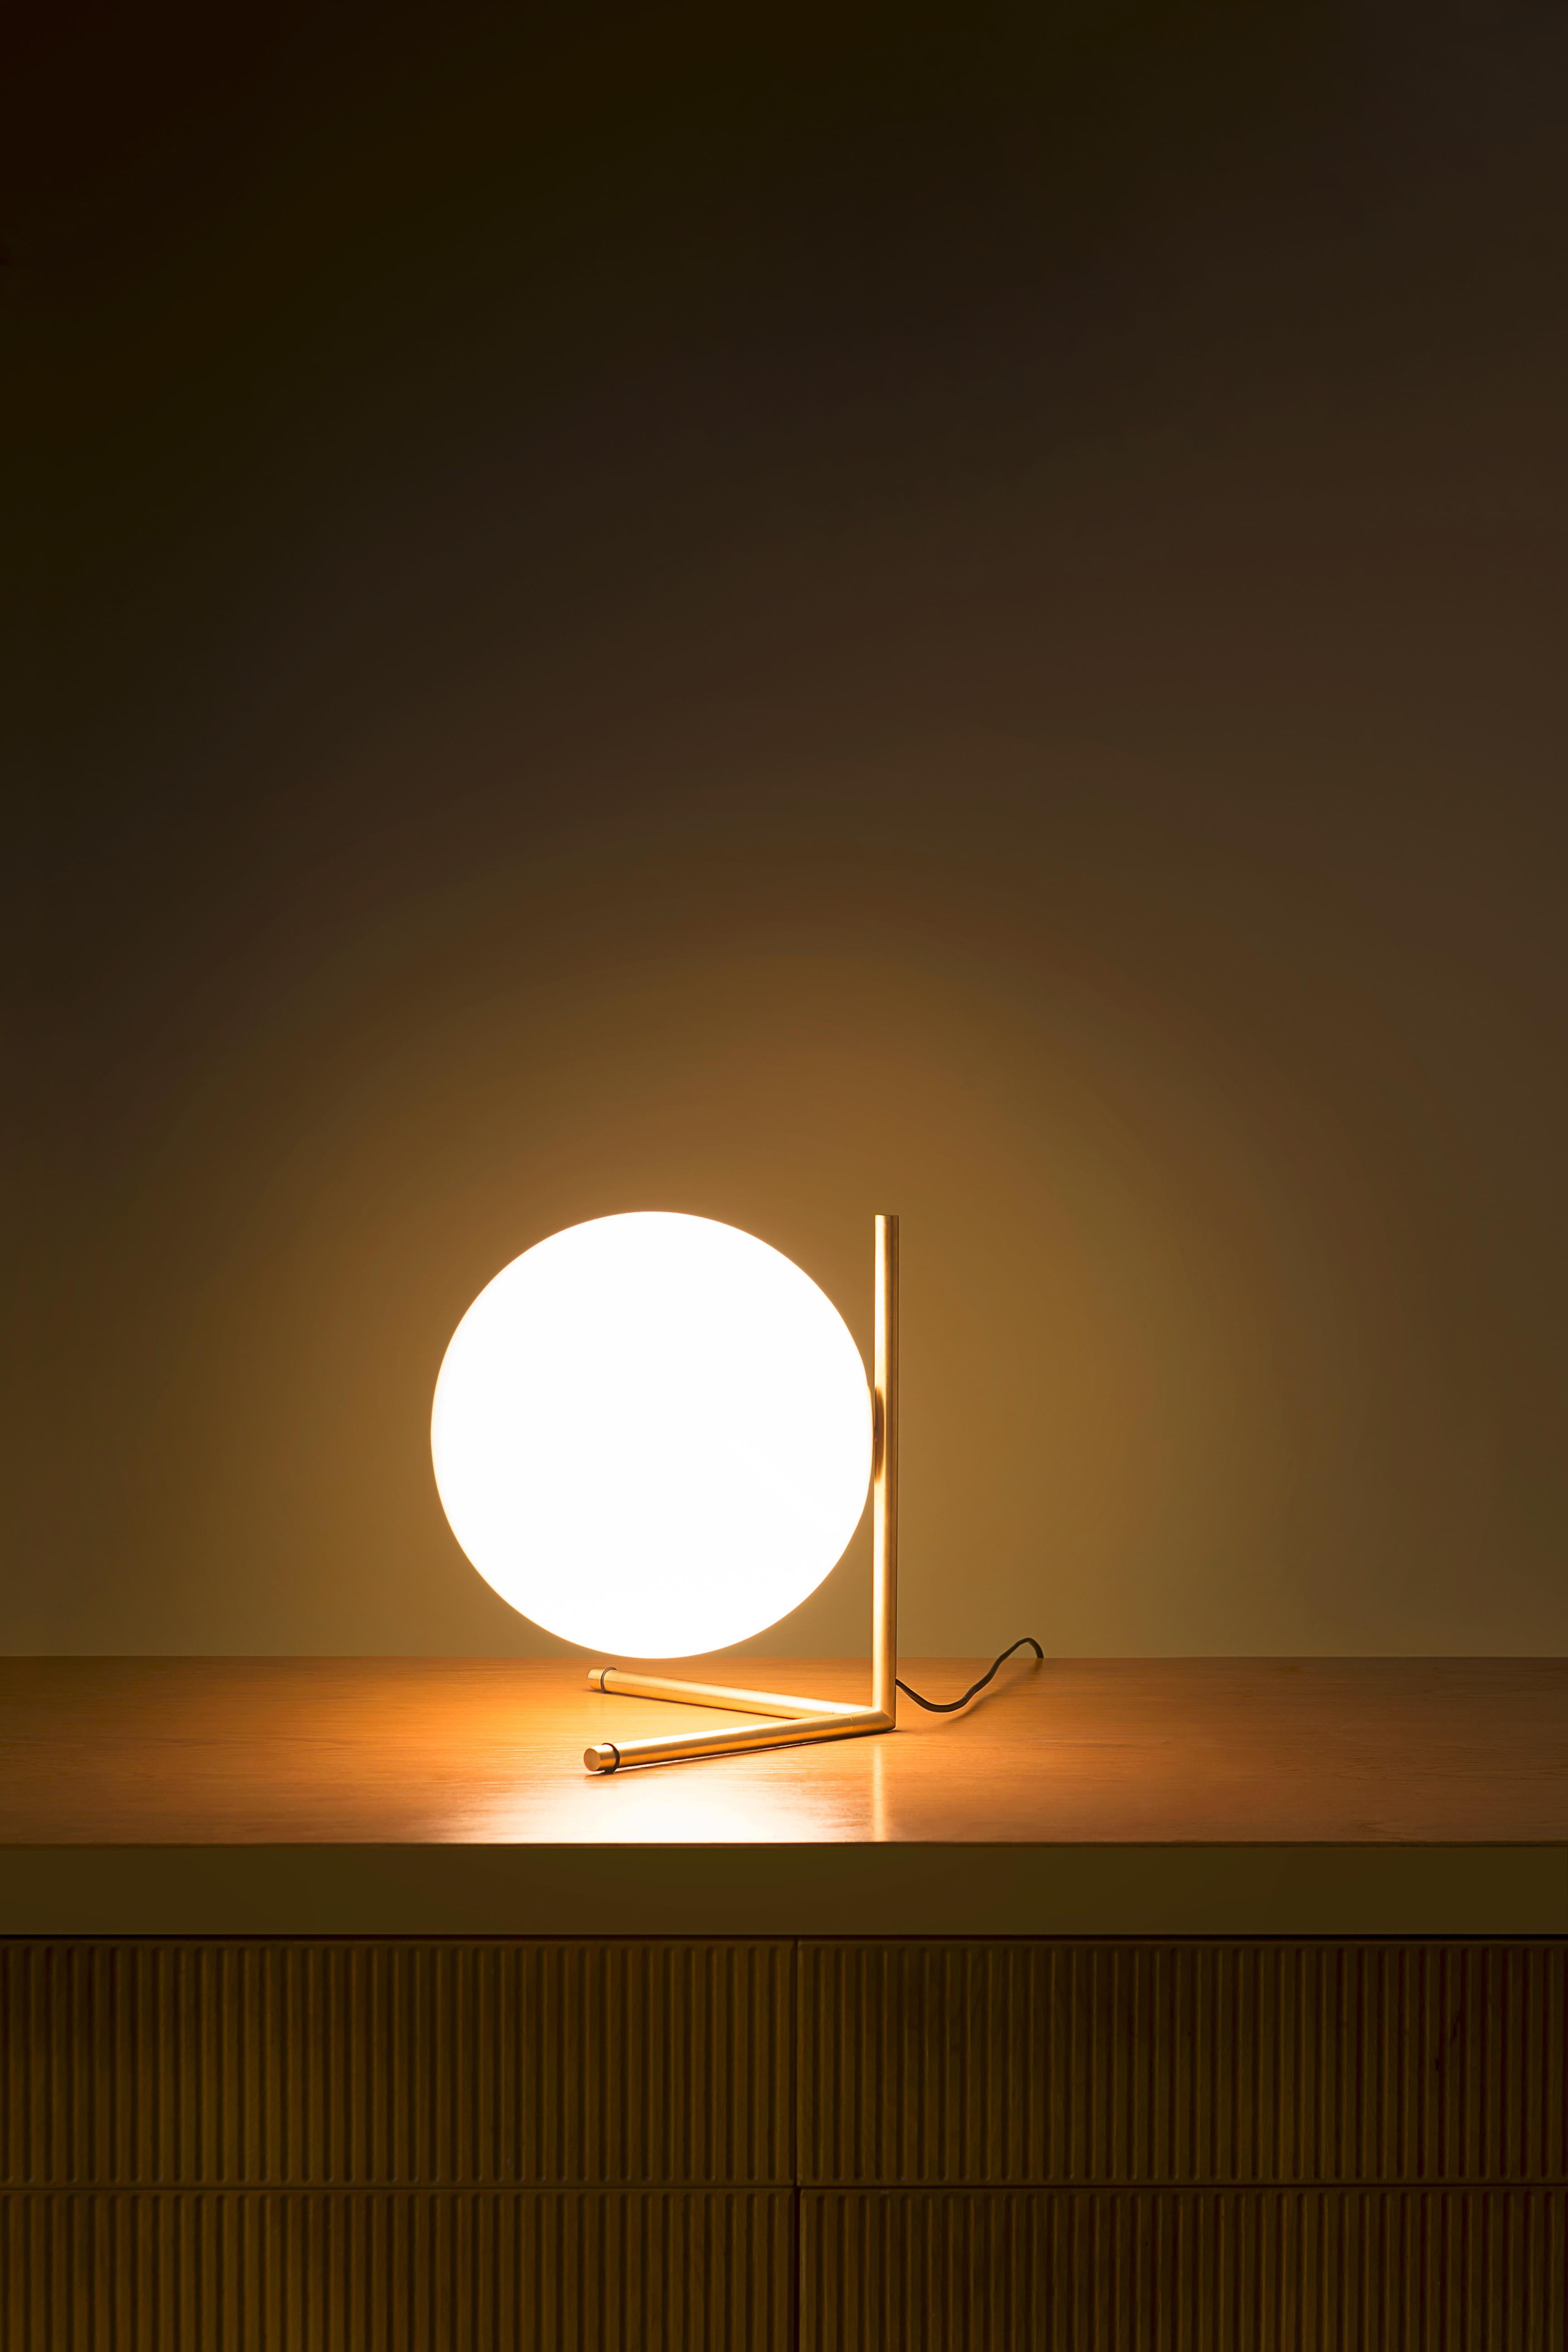 FLOS IC Lights T2 Table Lamp in Chrome by Michael Anastassiades

Like the other pieces in his IC Light Series, the IC Lights T balances designer Michael Anastassiades’ love of industrial simplicity with intricate symbolism. It provides diffused